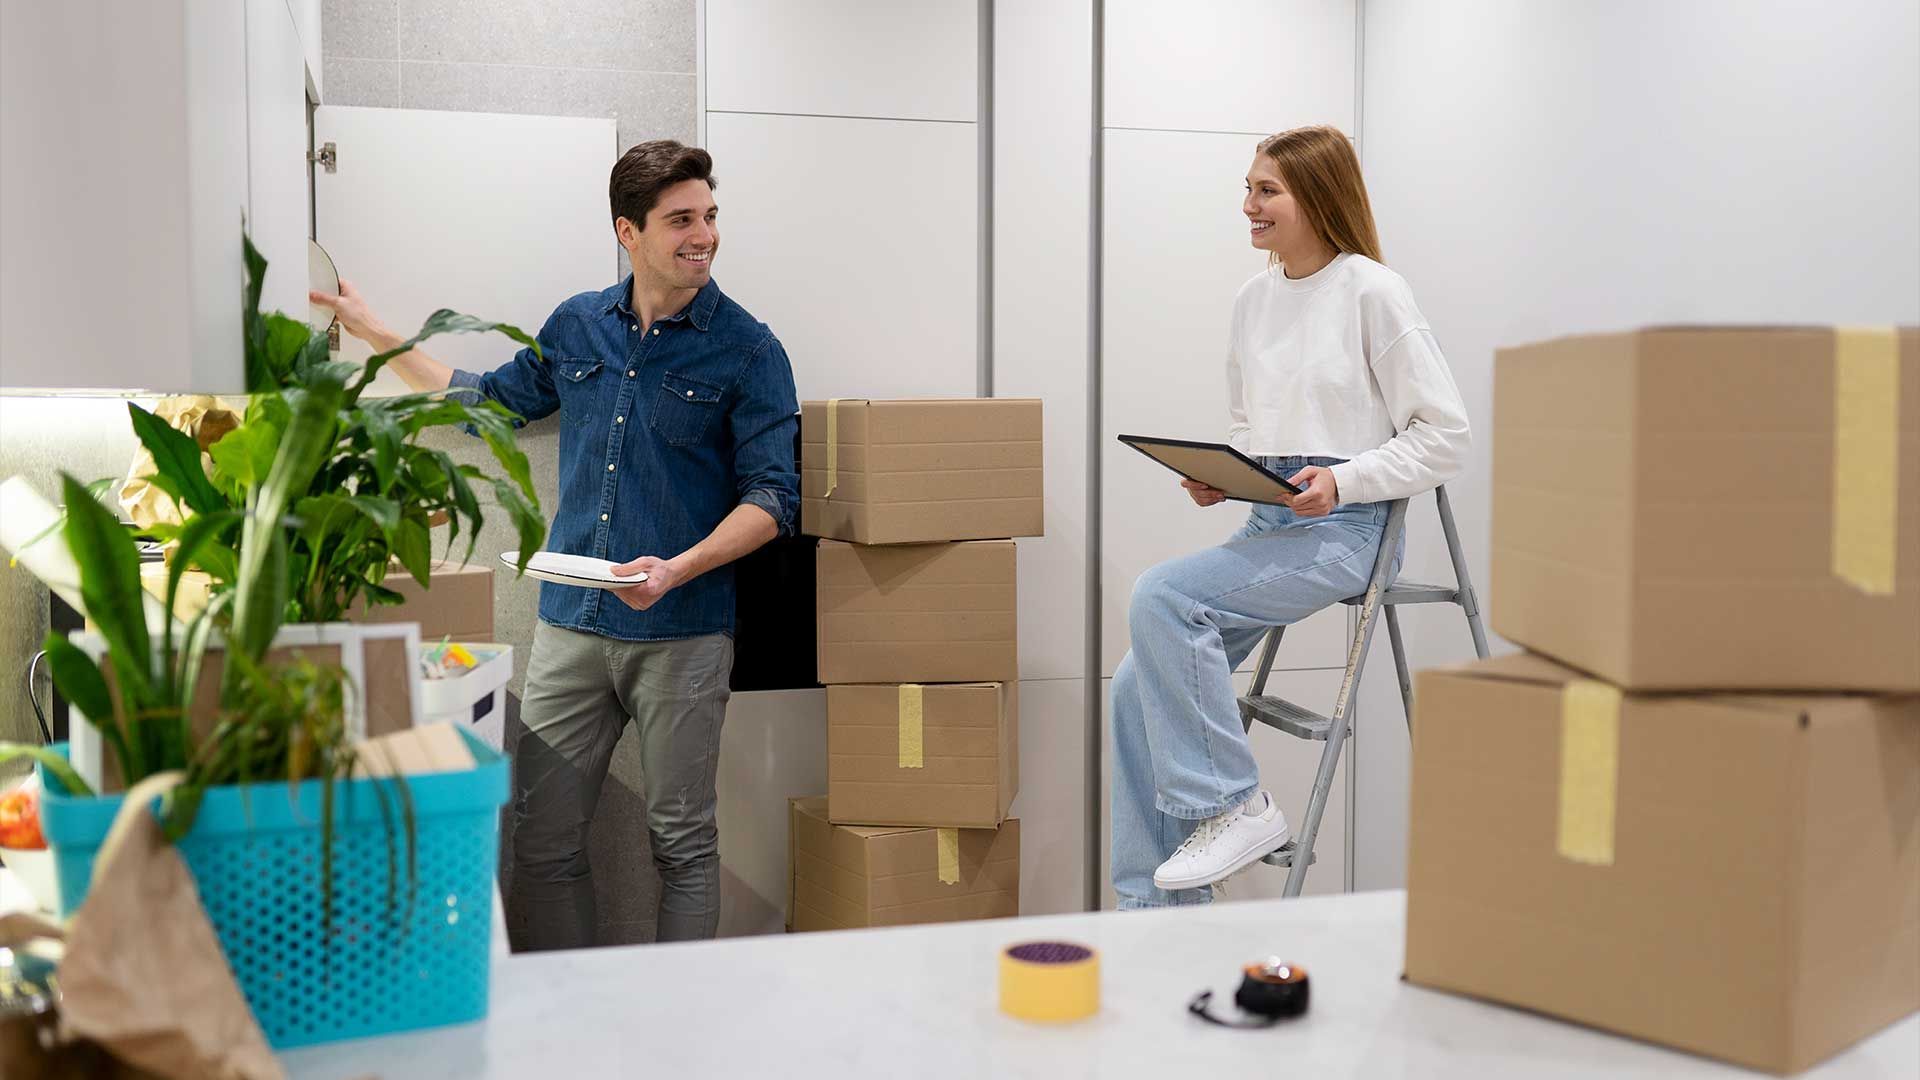 employee relocation services